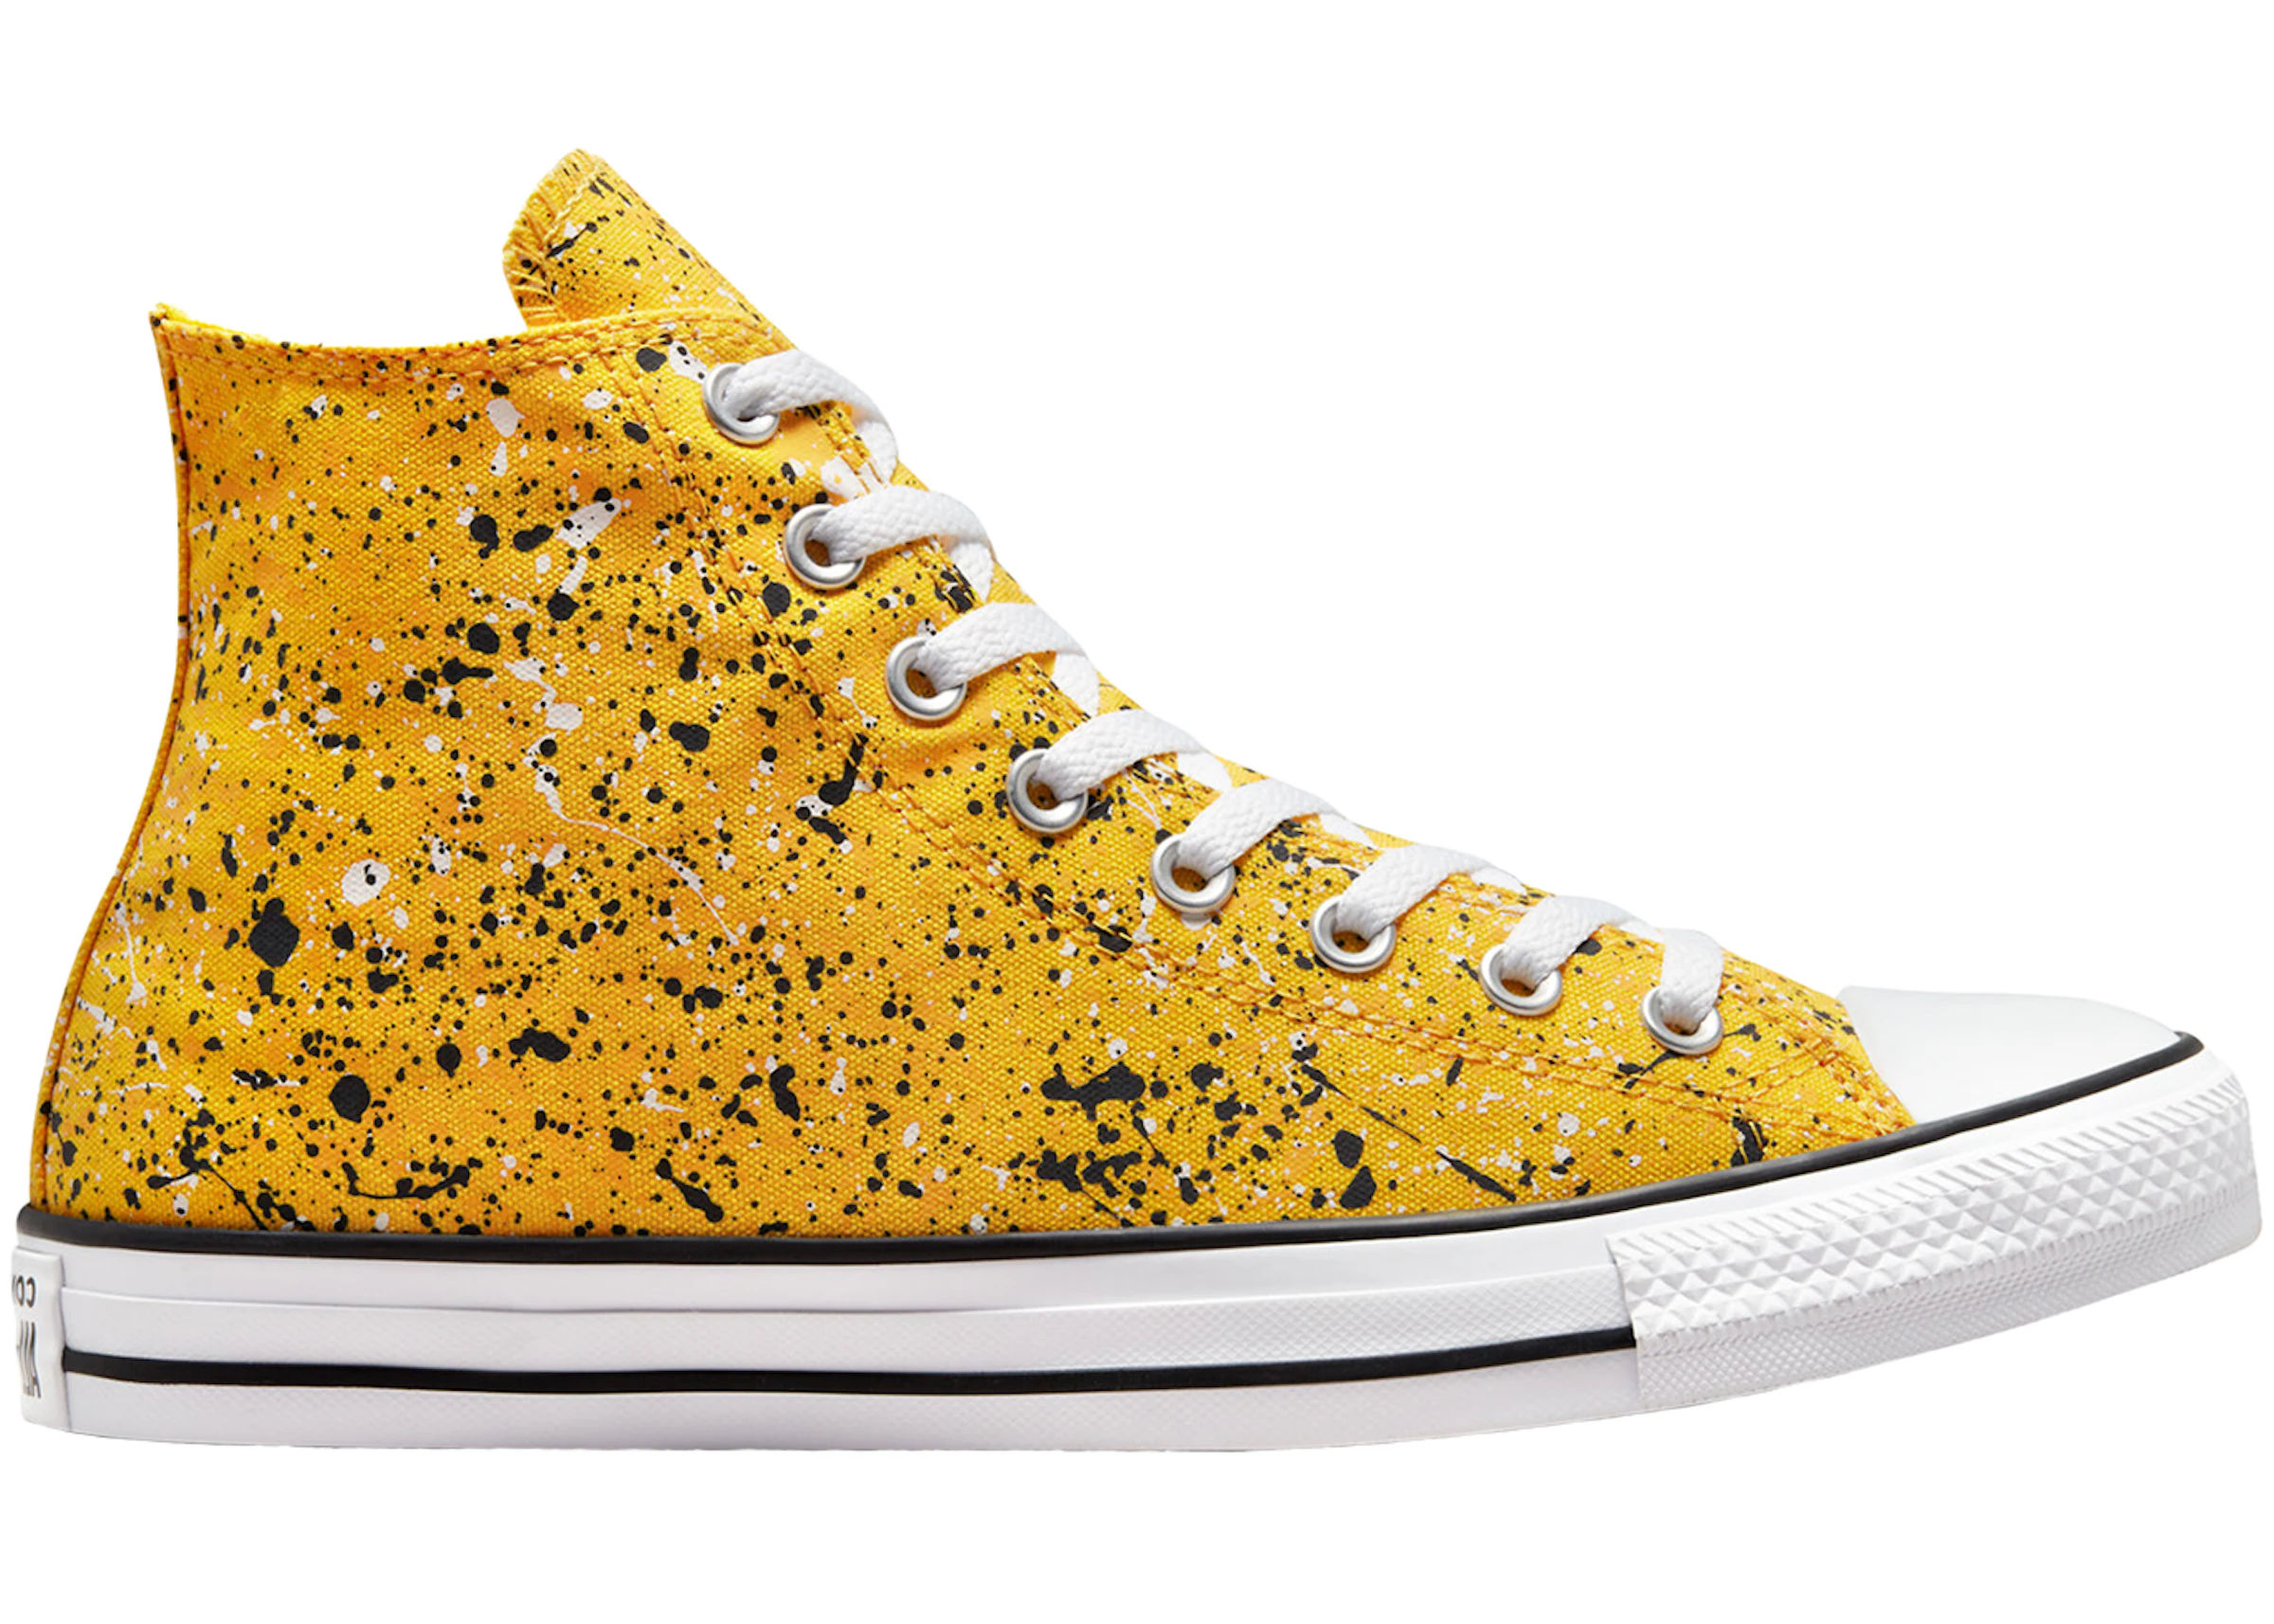 Taylor All-Star Hi Archive Paint Amarillo Yellow - A00467F - US